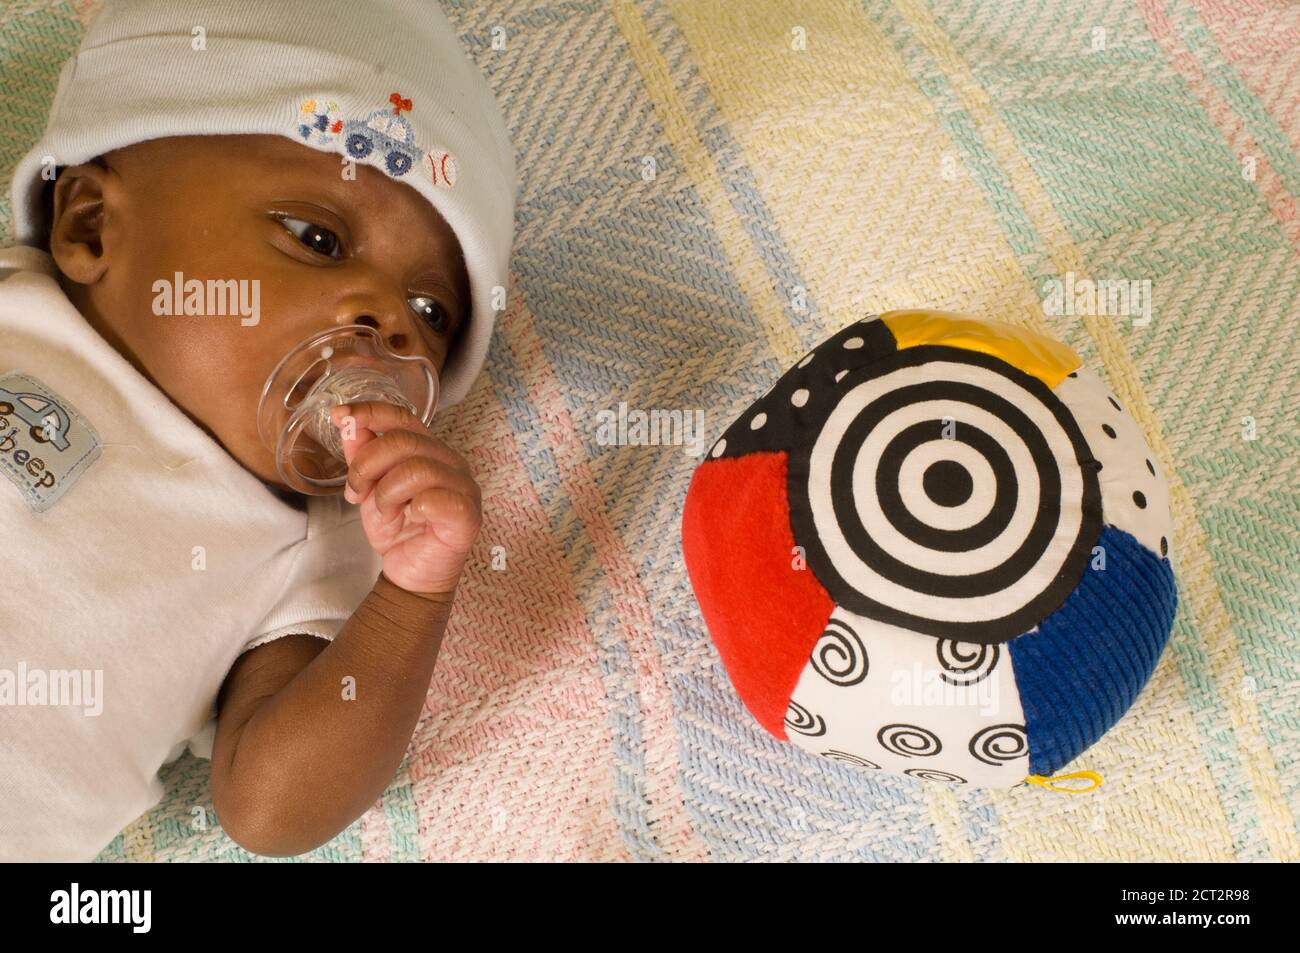 6 week old newborn baby boy one month premature alert looking at toy with high contrast black and white pattern, wearing cap and sucking on pacifier Stock Photo